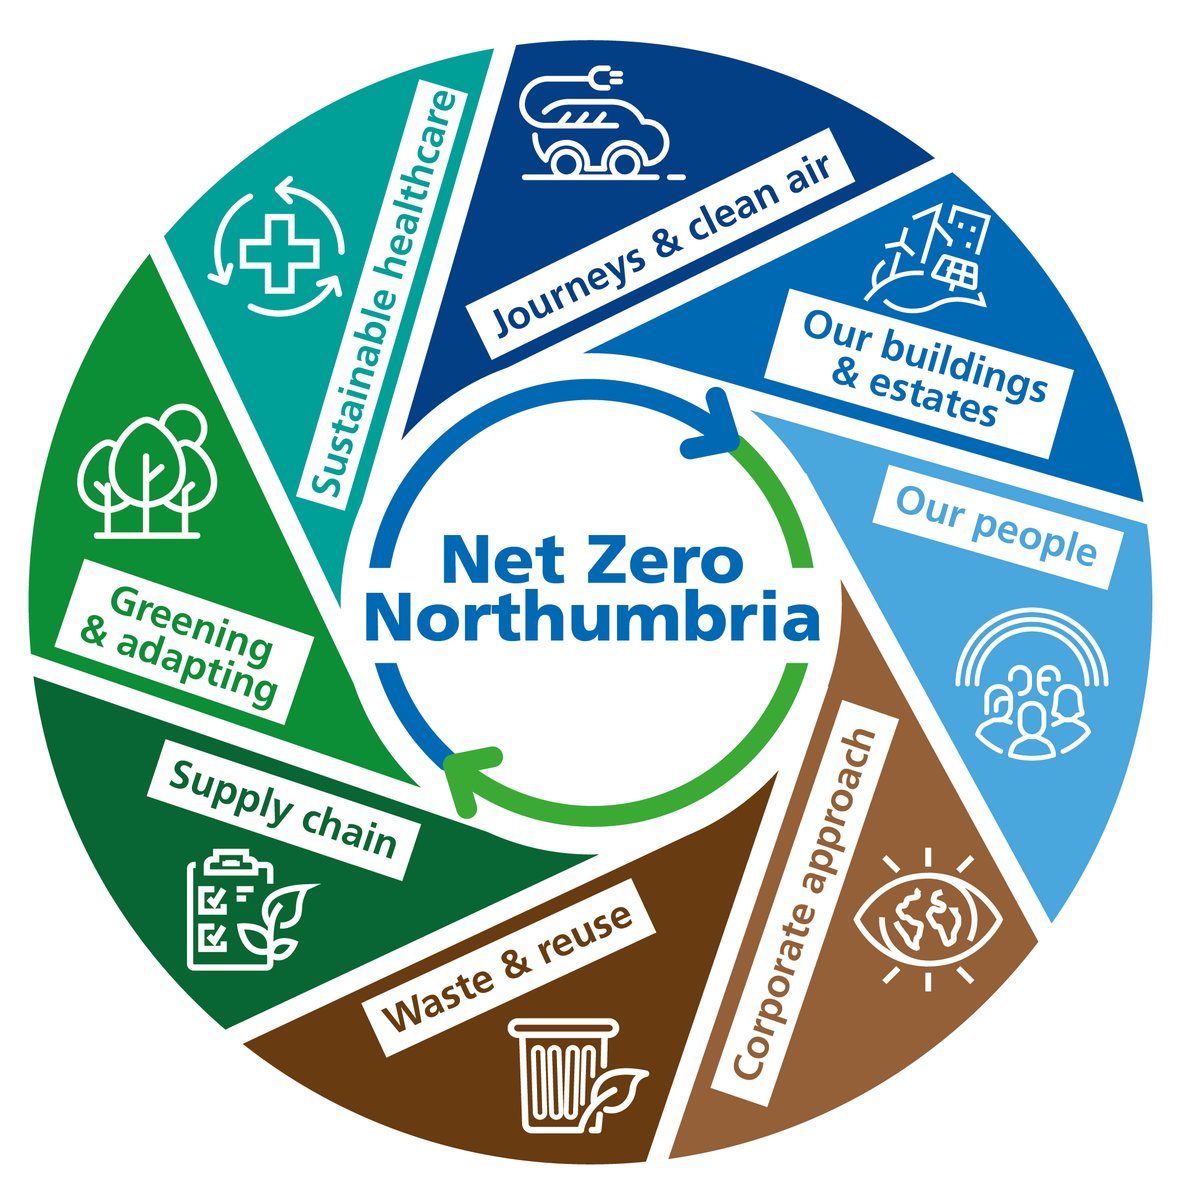 We have launched our new sustainability action plan, Net Zero Northumbria ♻ This 2-year plan sets out our commitment to reaching net zero status by 2040. It includes pledges to increase the use of reusable clinical products and to increase awareness of waste management.